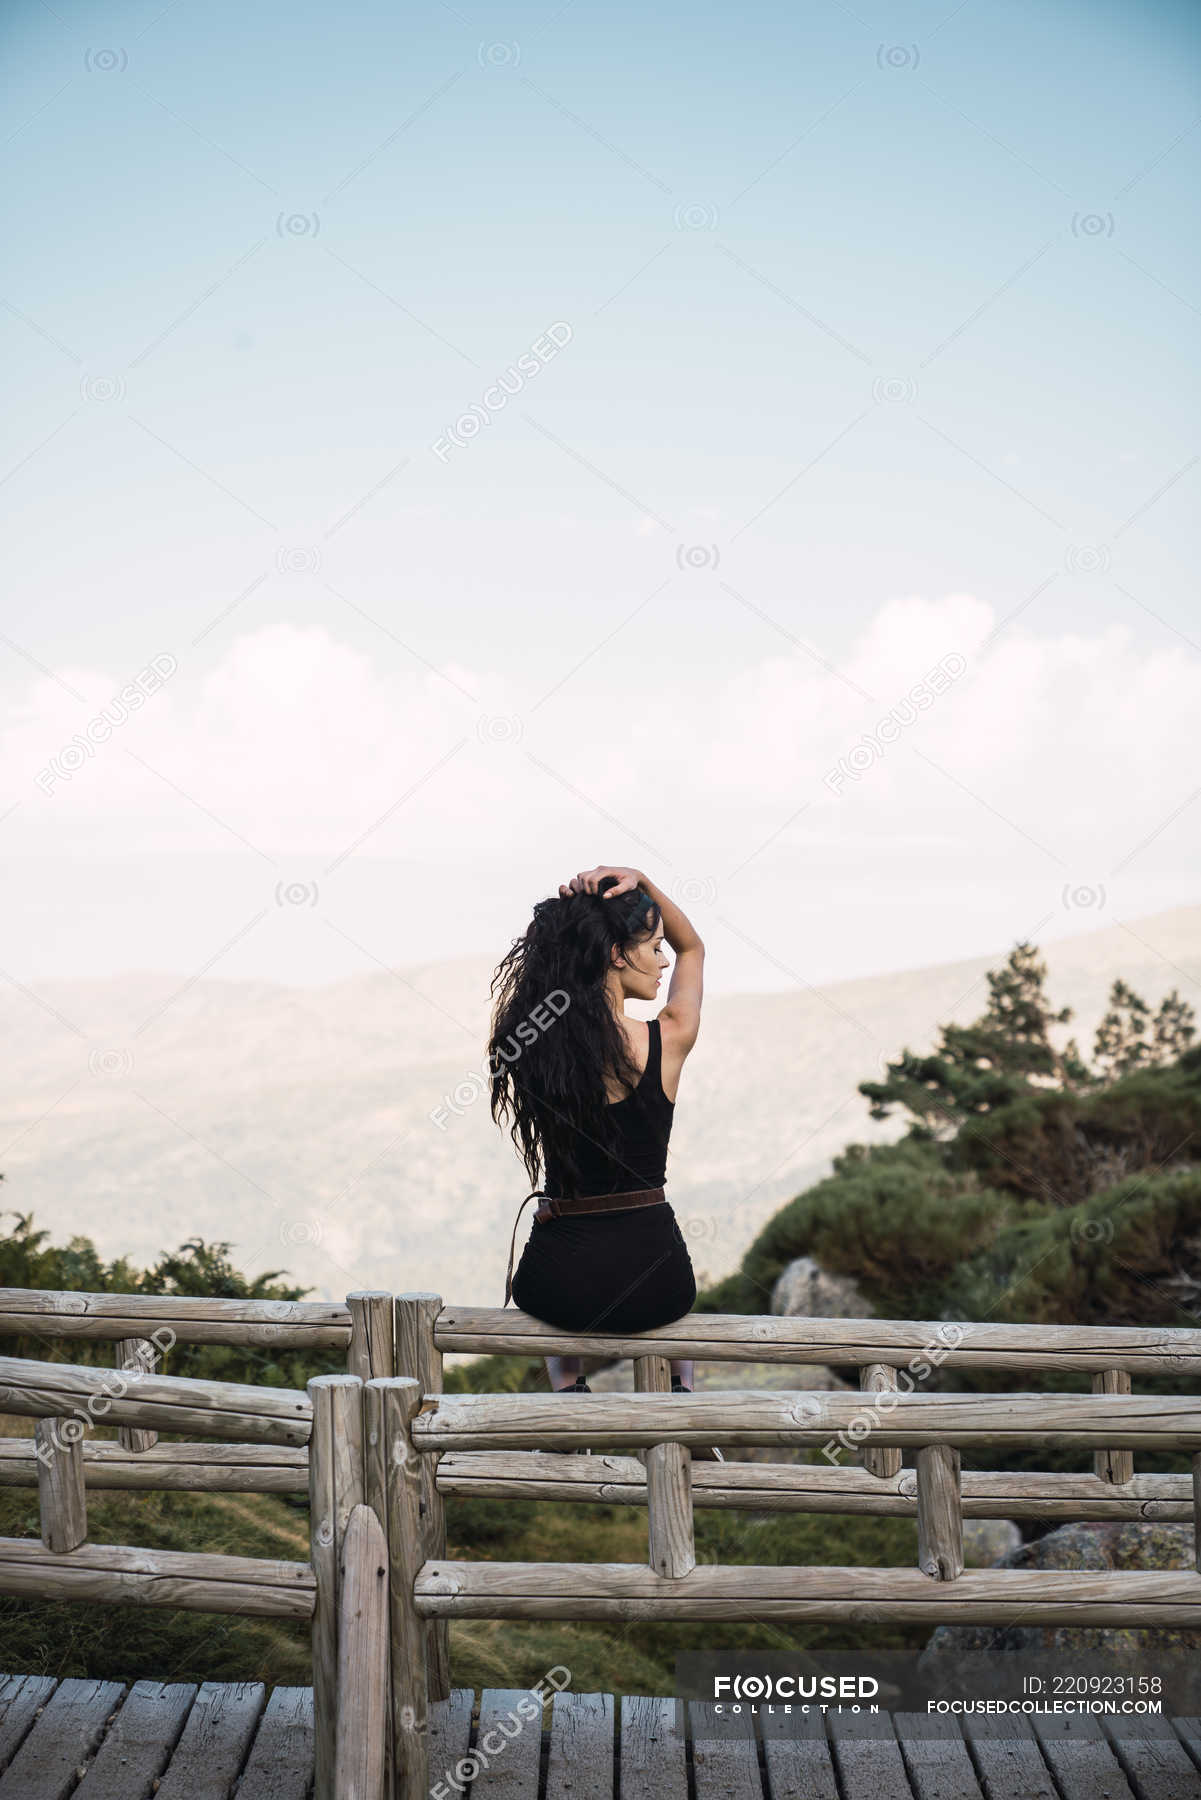 Back view of sensual woman in black with long hair sitting on wooden fence  above picturesque valley landscape — spain, walkway - Stock Photo |  #220923158